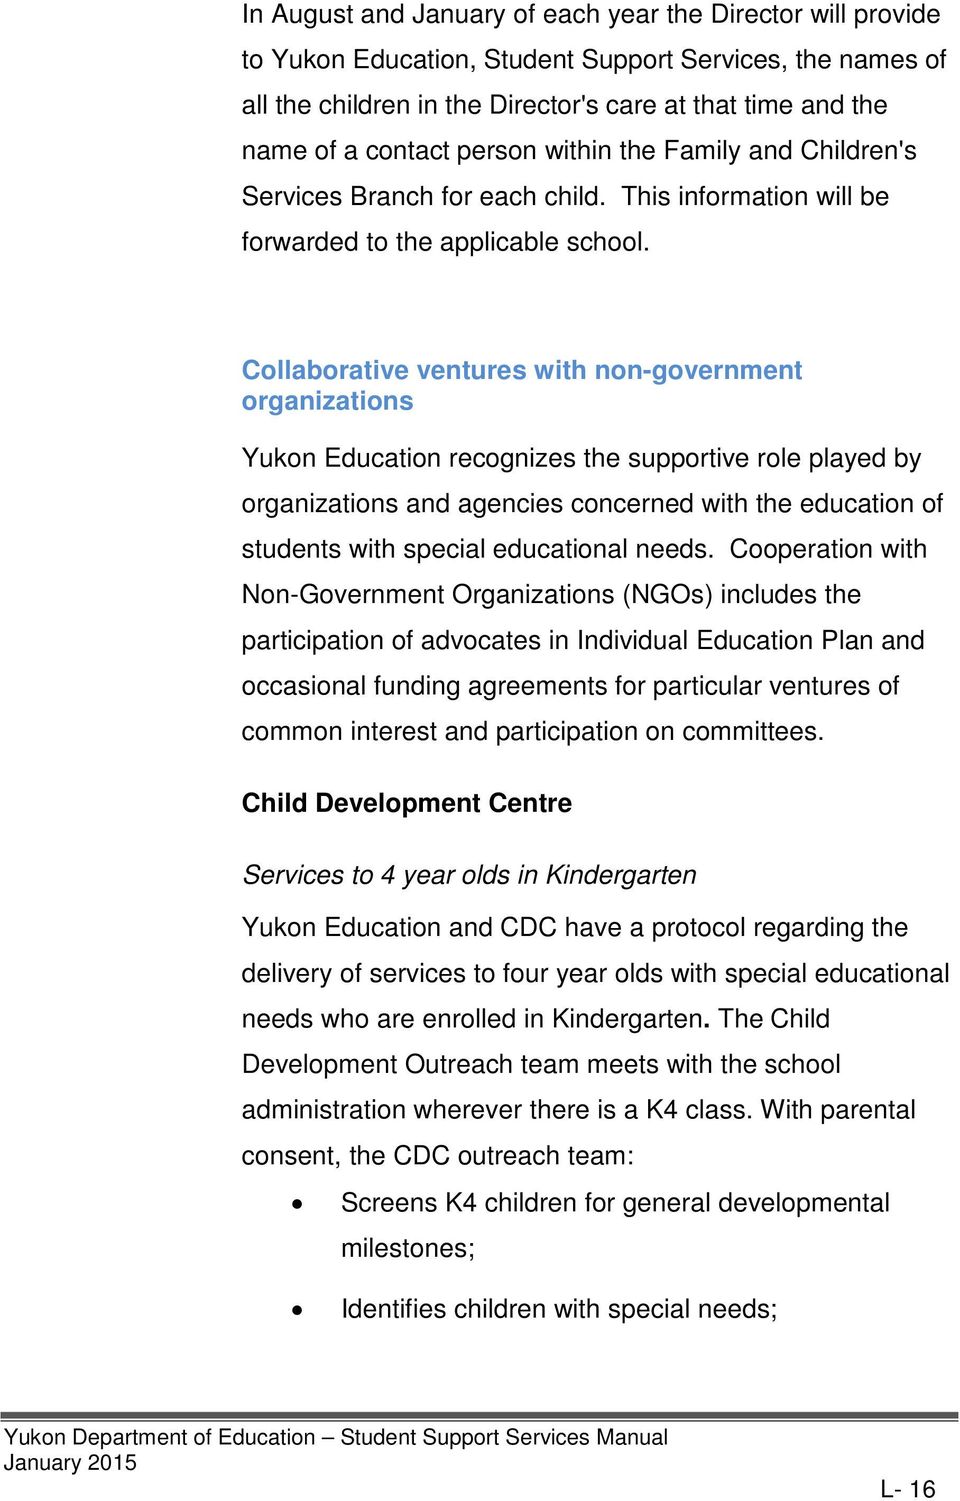 Collaborative ventures with non-government organizations Yukon Education recognizes the supportive role played by organizations and agencies concerned with the education of students with special